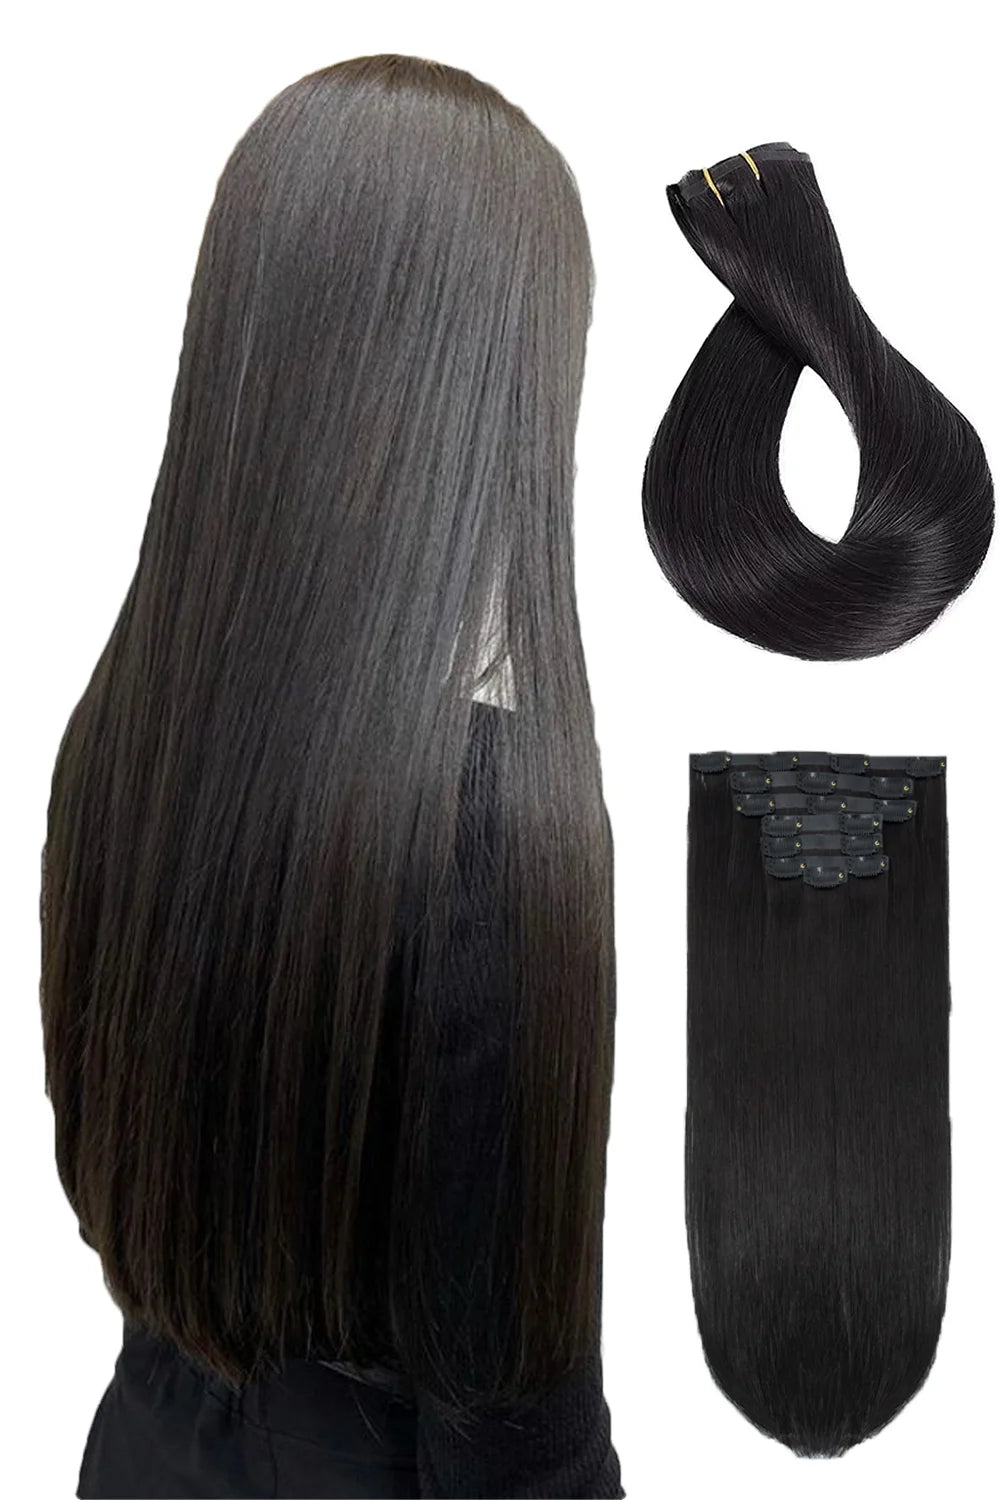 Seamless Clip in Hair Extensions Silicone Weft Straight Black Hair